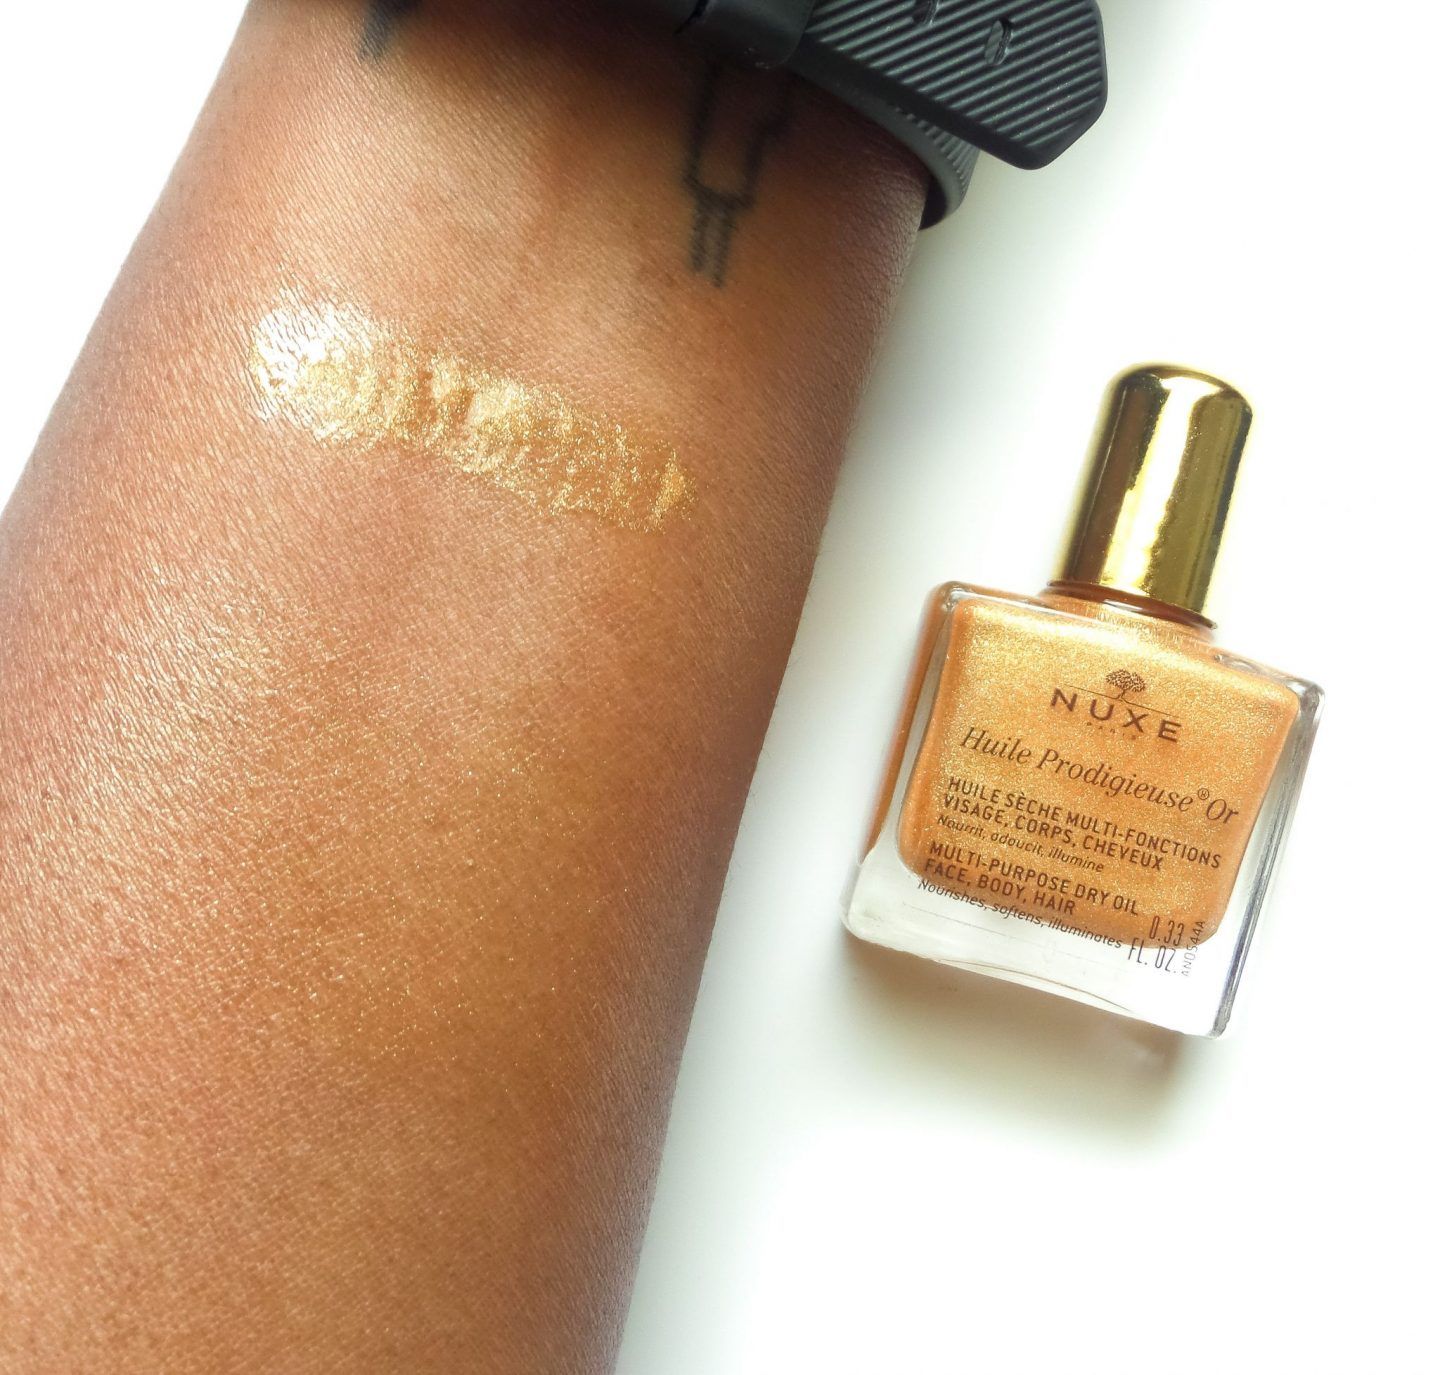 nuxe dry oil shimmer review